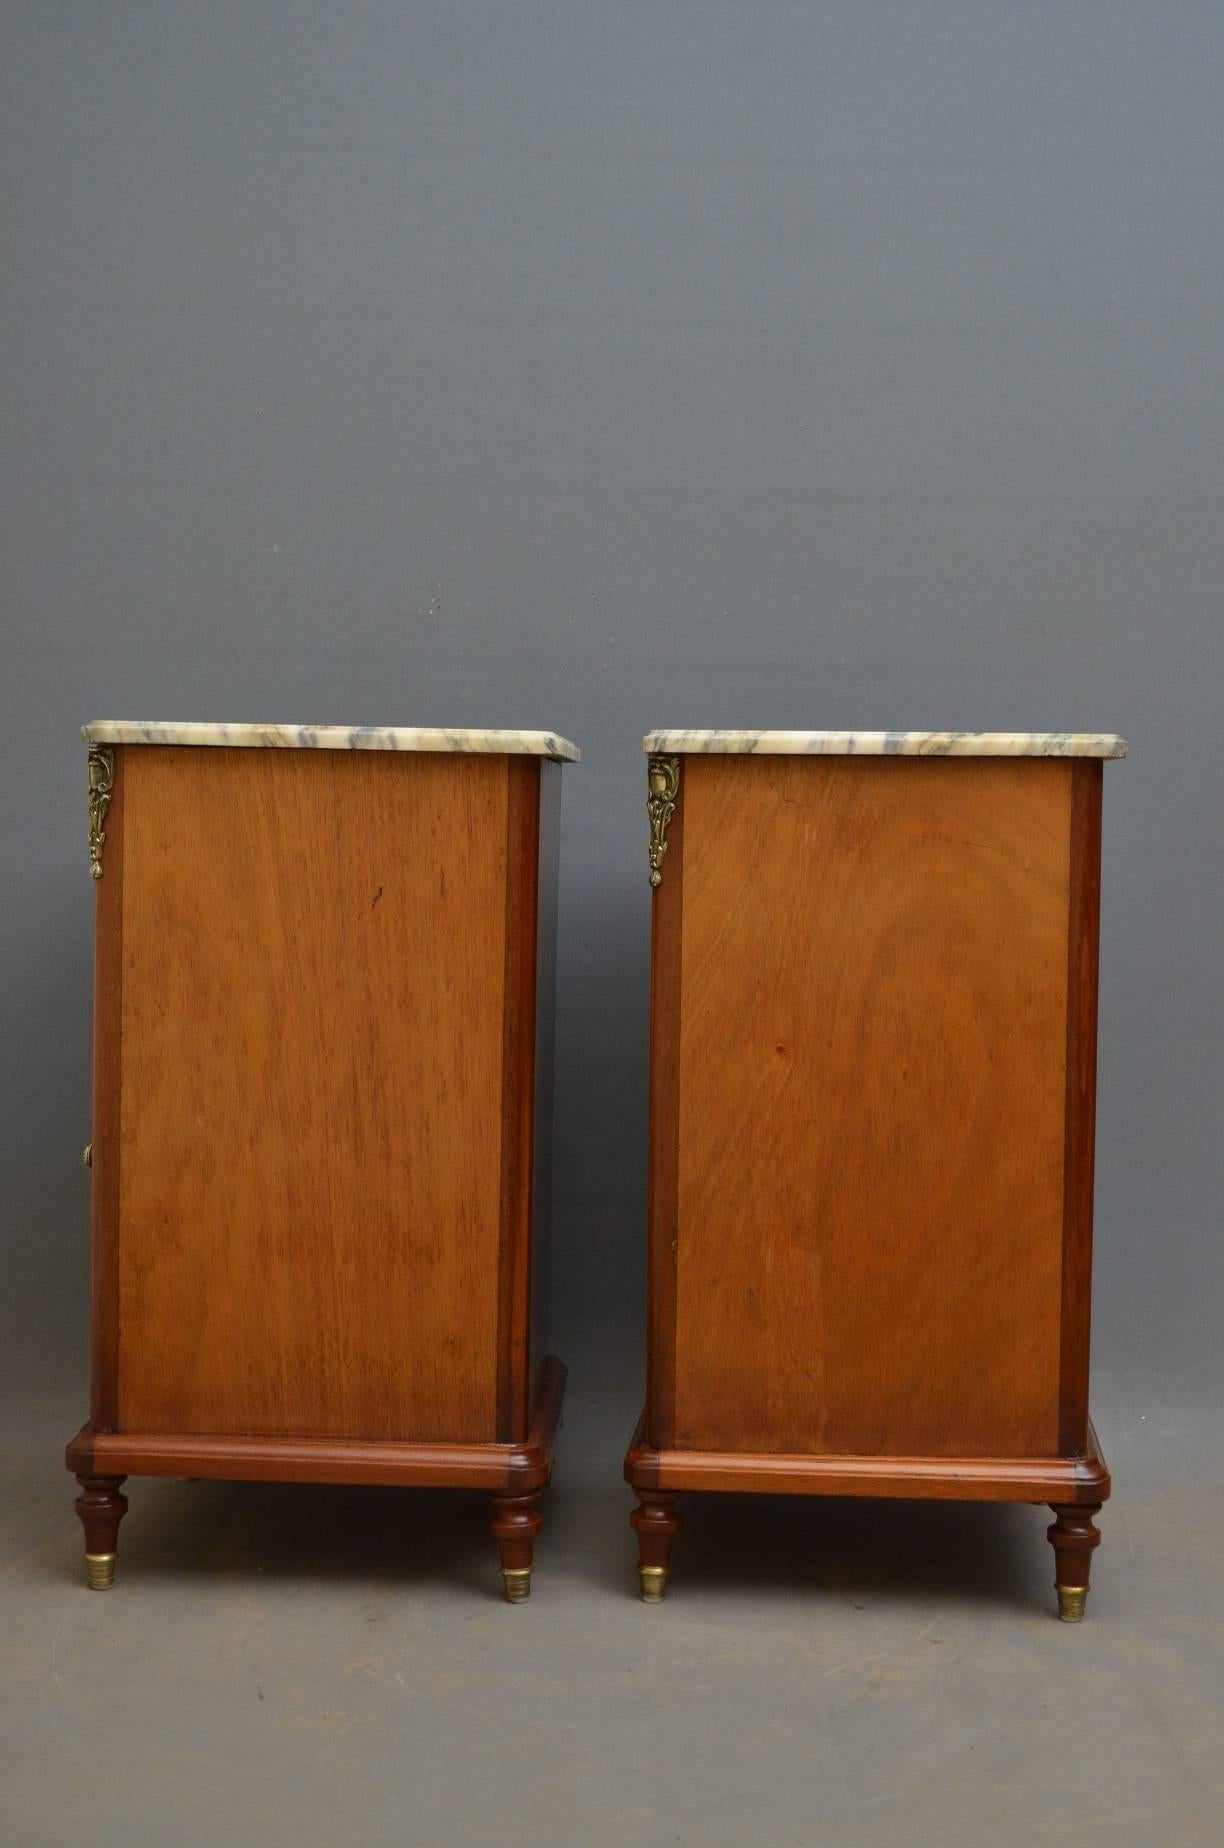 Marble Continental Pair of Bedside Cabinets in Mahogany